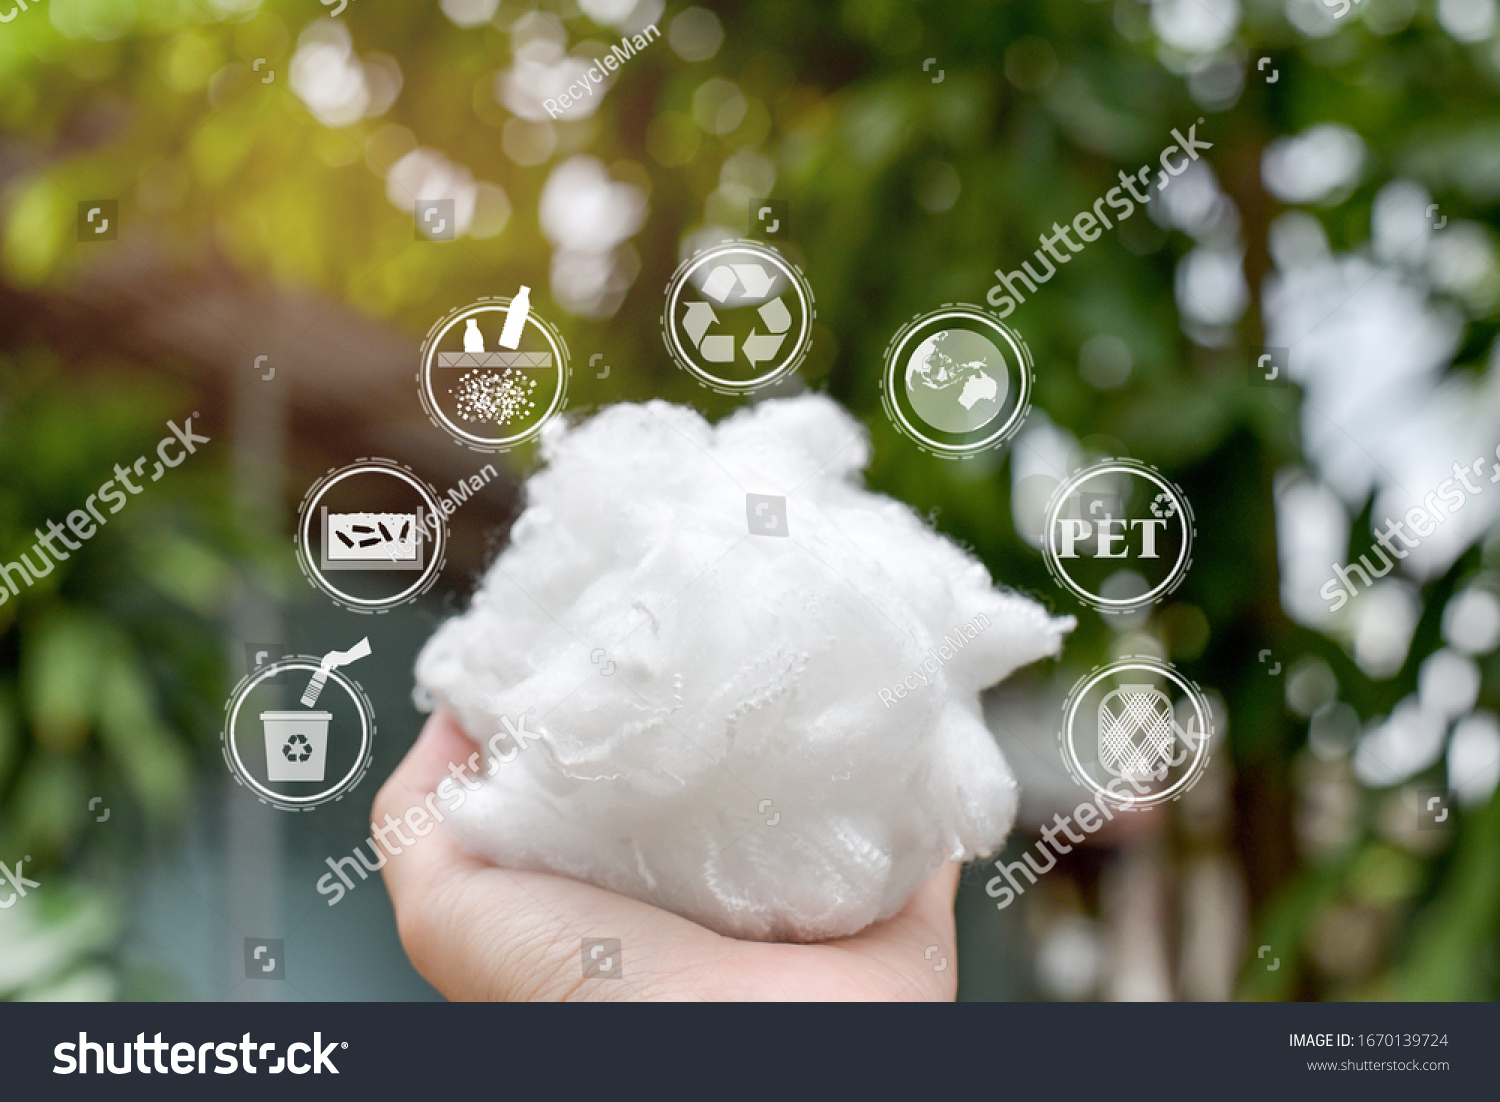 Hand holding Polyester stable fiber with green background,recycle icon,picking up and wash Plastic Bottle,Protect the earth icon,PET icon and Yarn icon.Chemical concept #1670139724